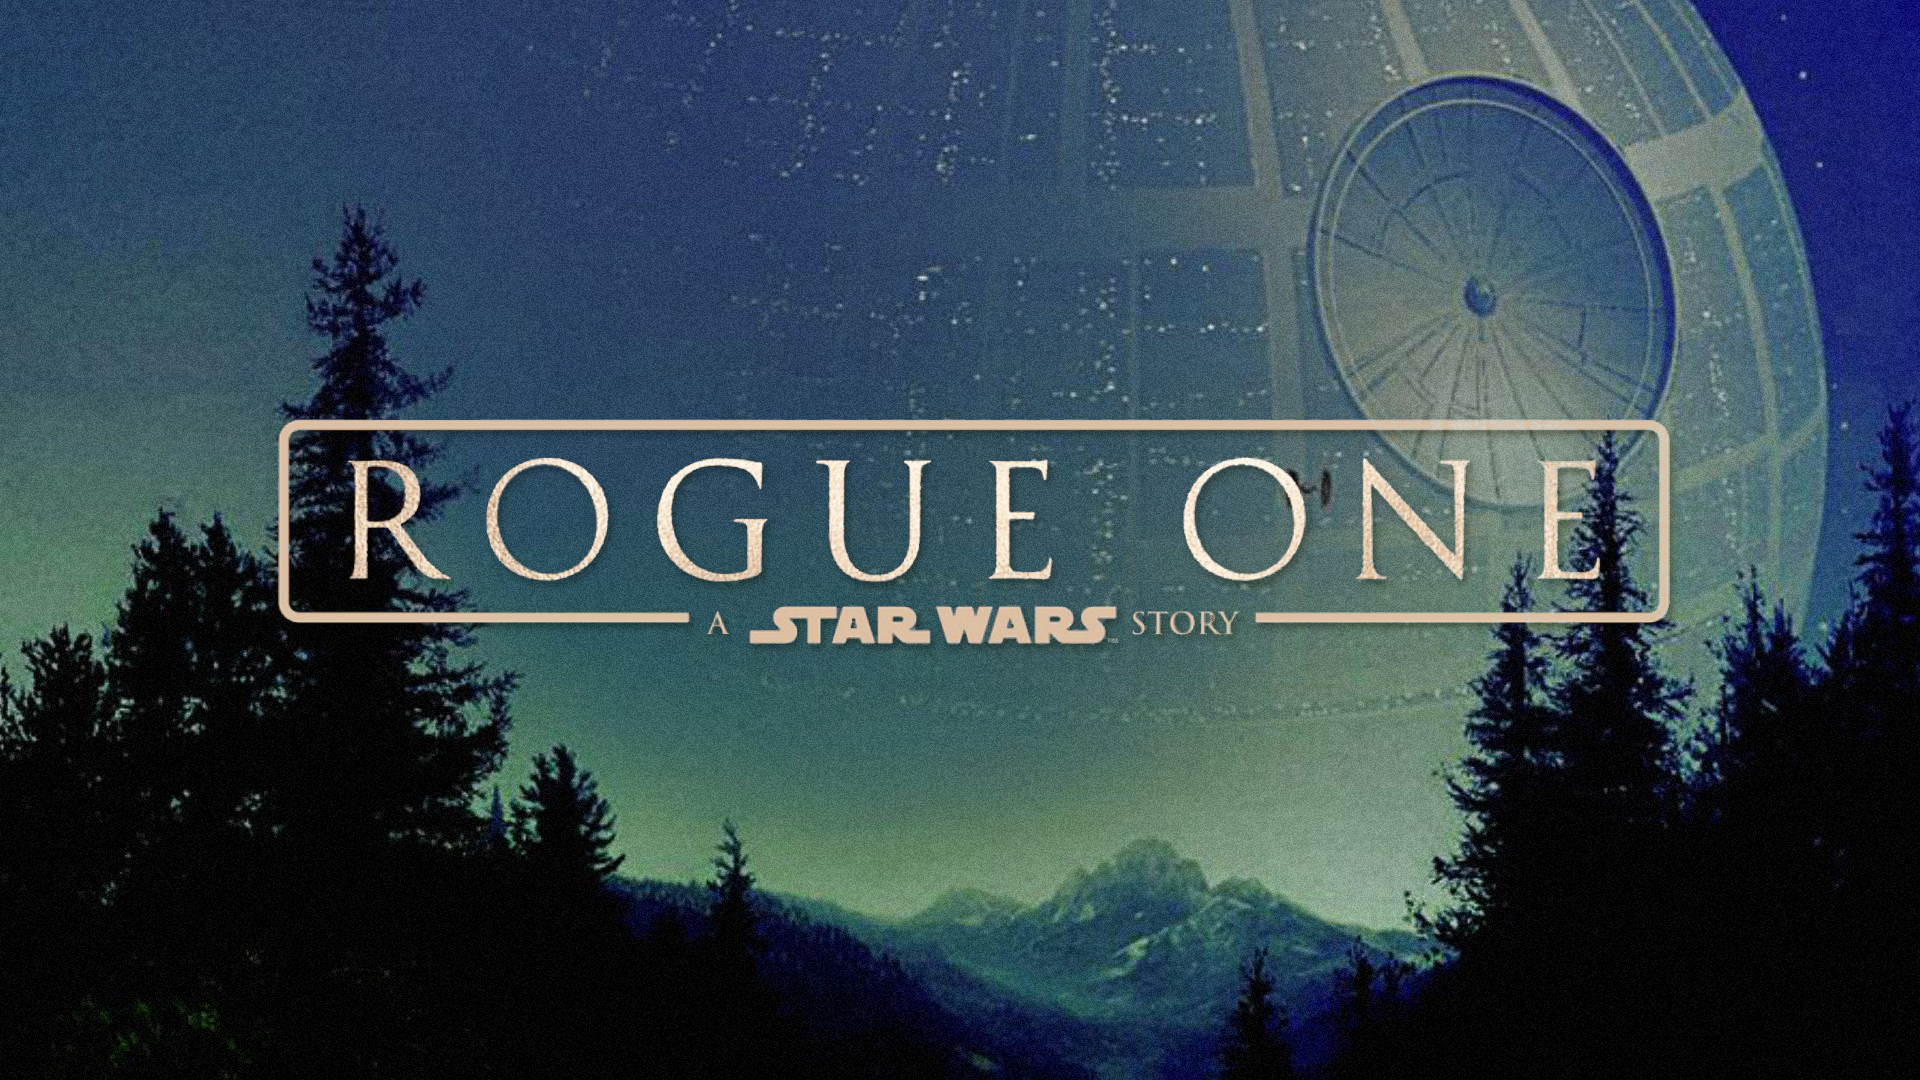 Final Question... When is the new film 'Rogue One' set?